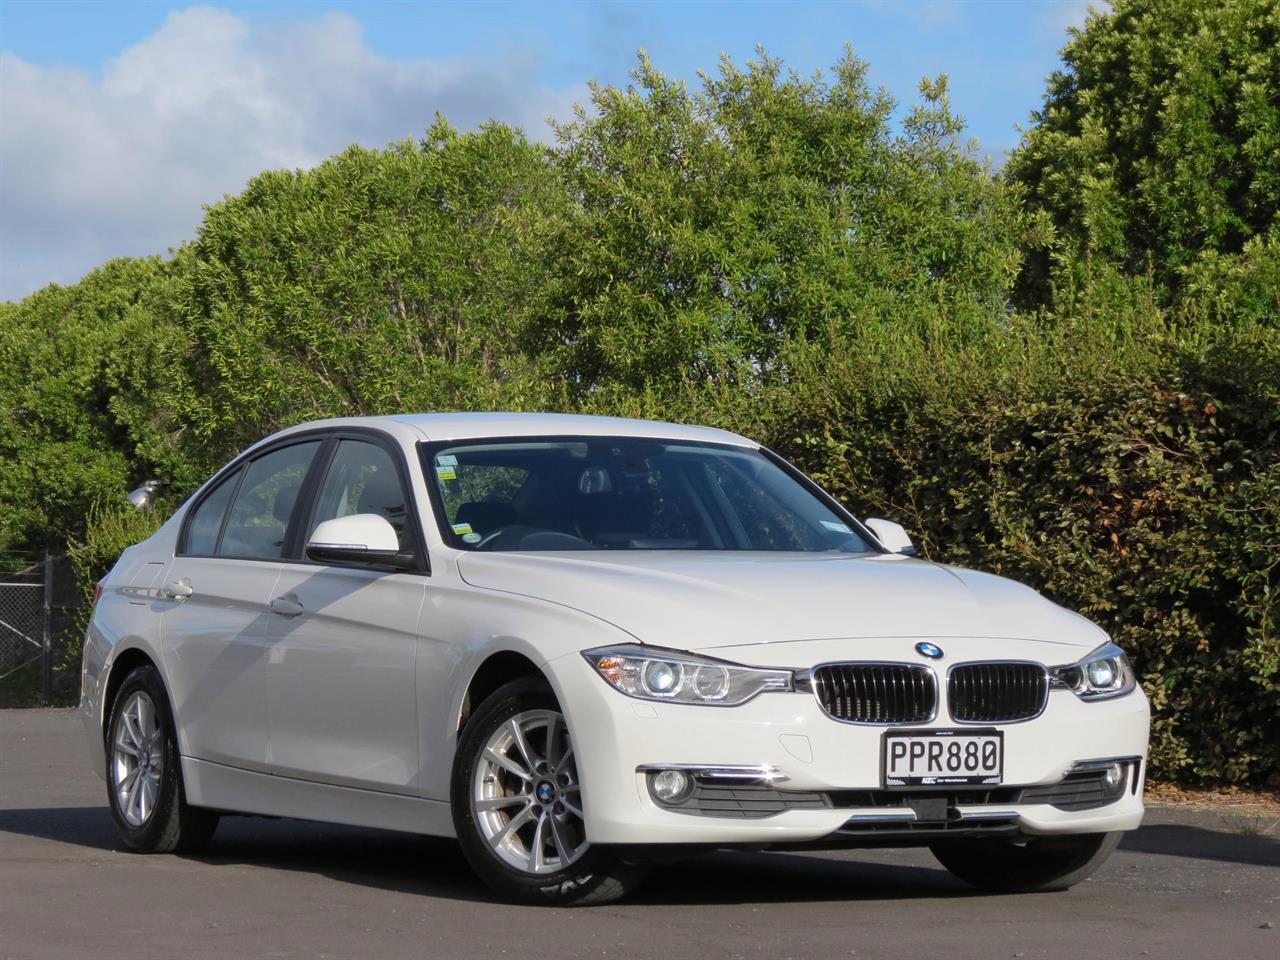 NZC 2015 BMW 320i just arrived to Auckland